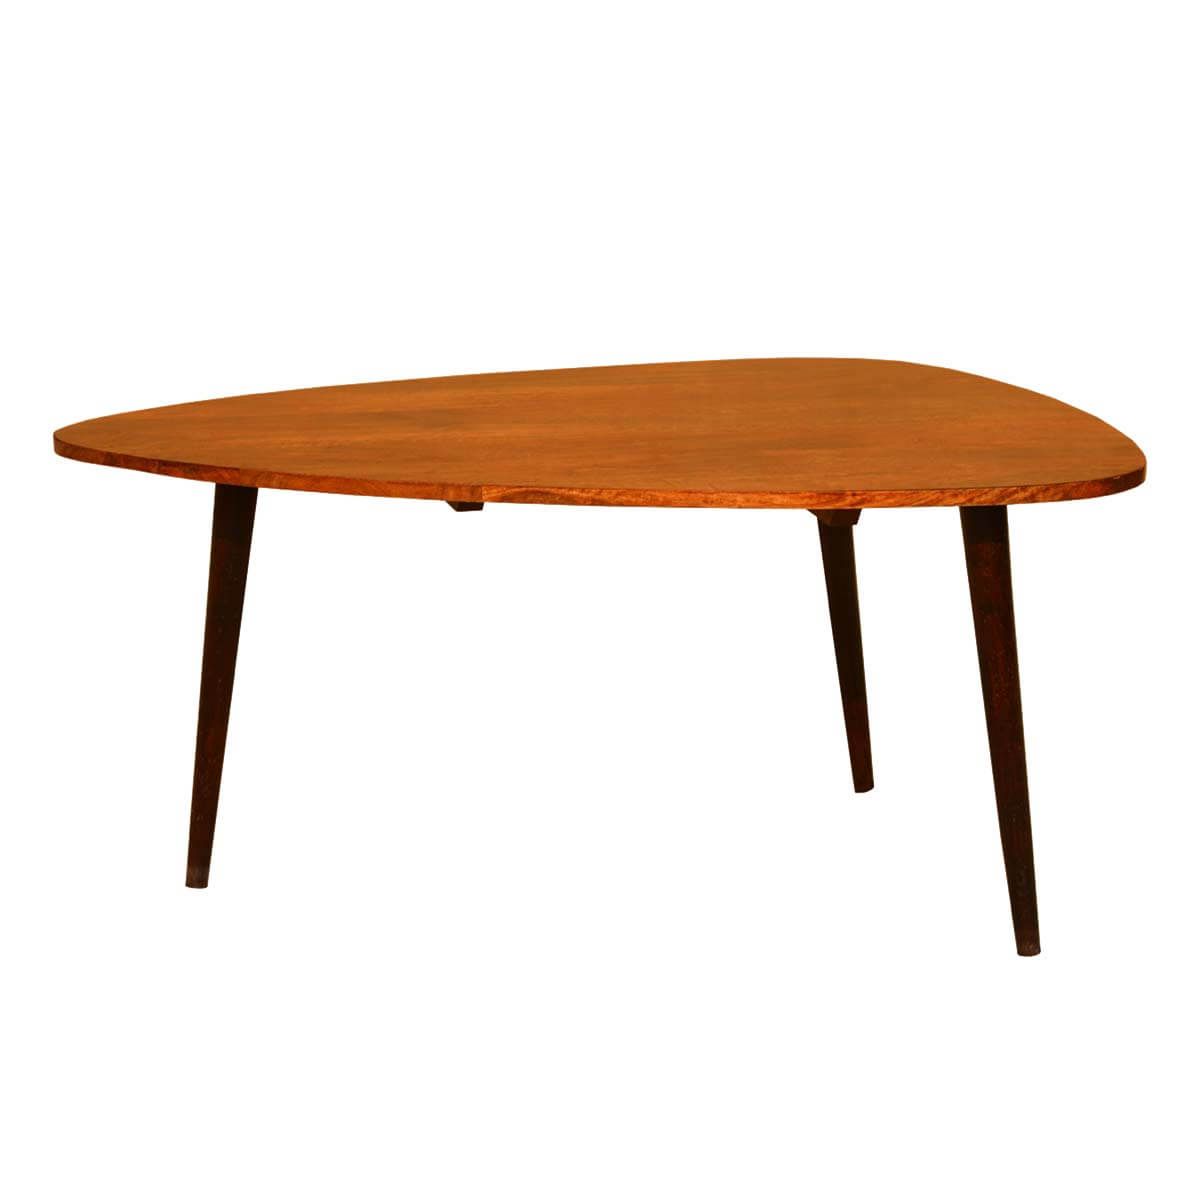 Triangular Coffee Tables With Regard To Widely Used Arrowhead Mango Wood Triangular Coffee Table (View 3 of 20)